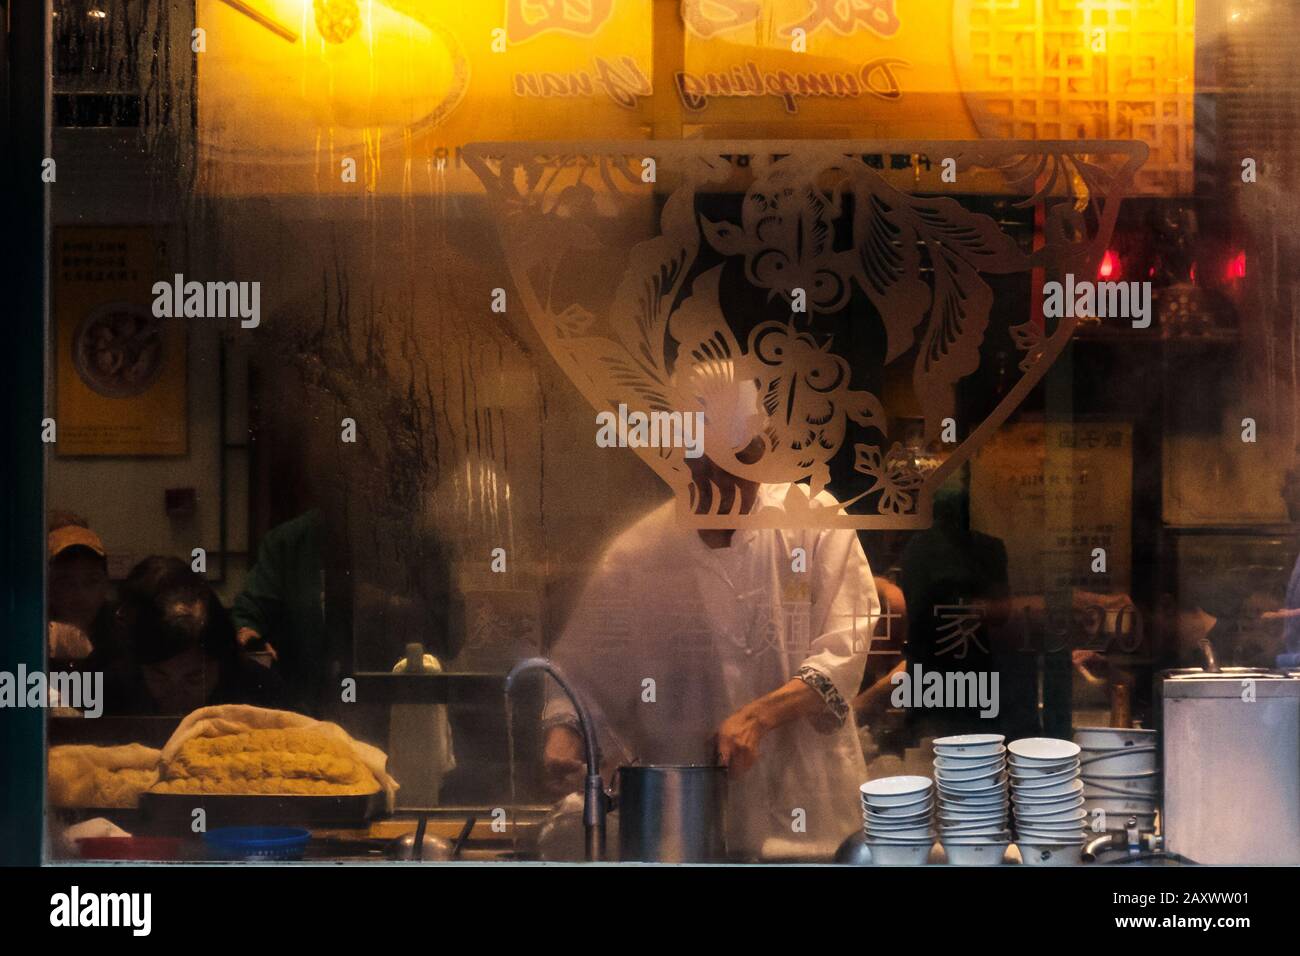 Hong Kong - November, 2019:  Window of Chinese restaurant showing chef cooking food and people eating Stock Photo